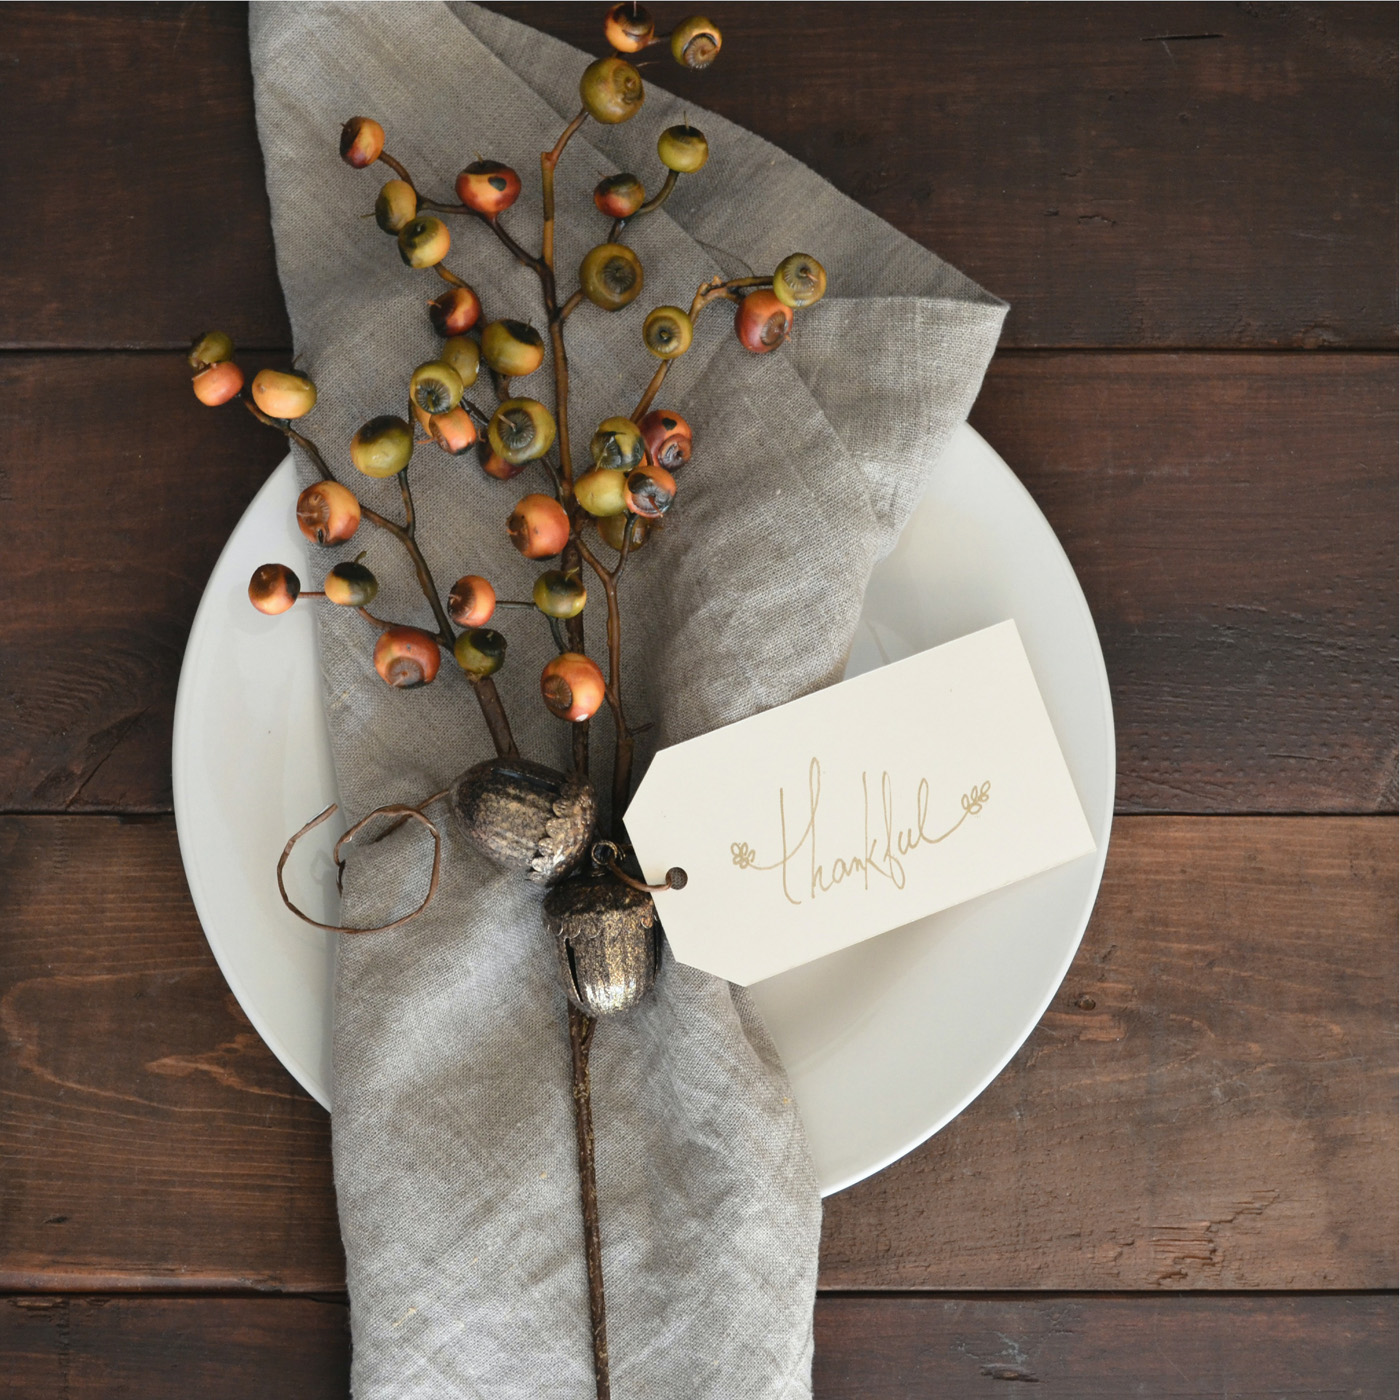 How to Have a Healthy, Happy Thanksgiving — Wild Food Recipe Included!